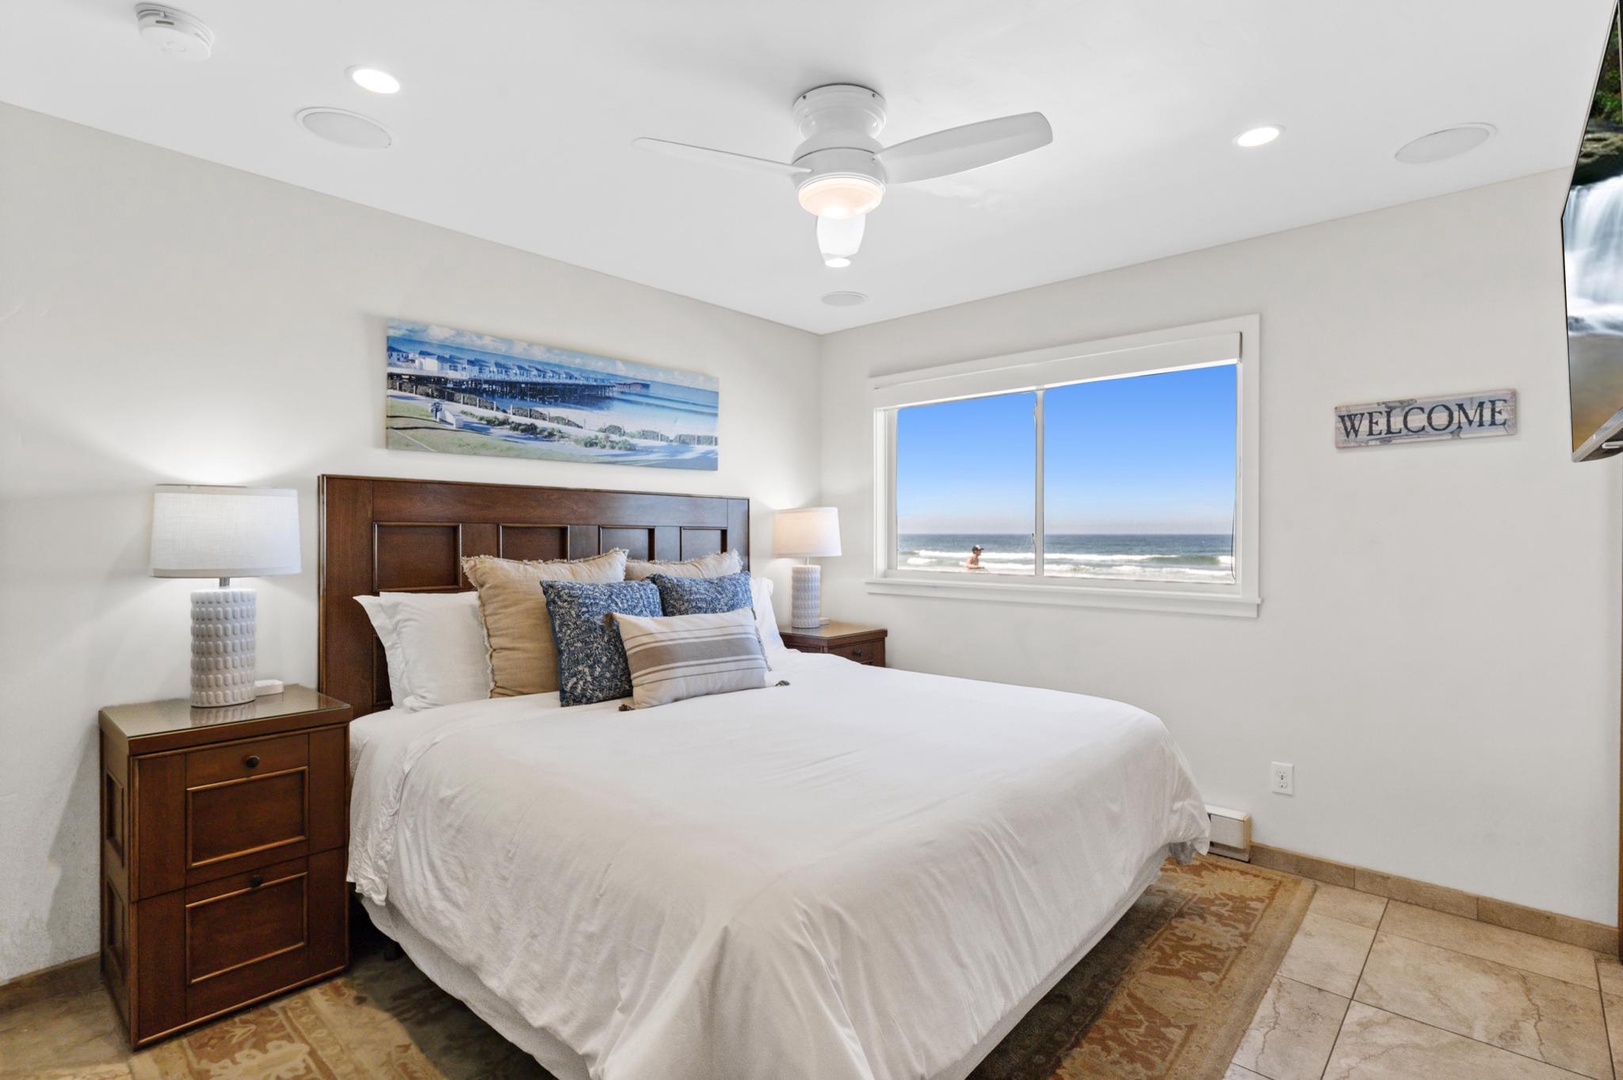 Primary bedroom with ocean view